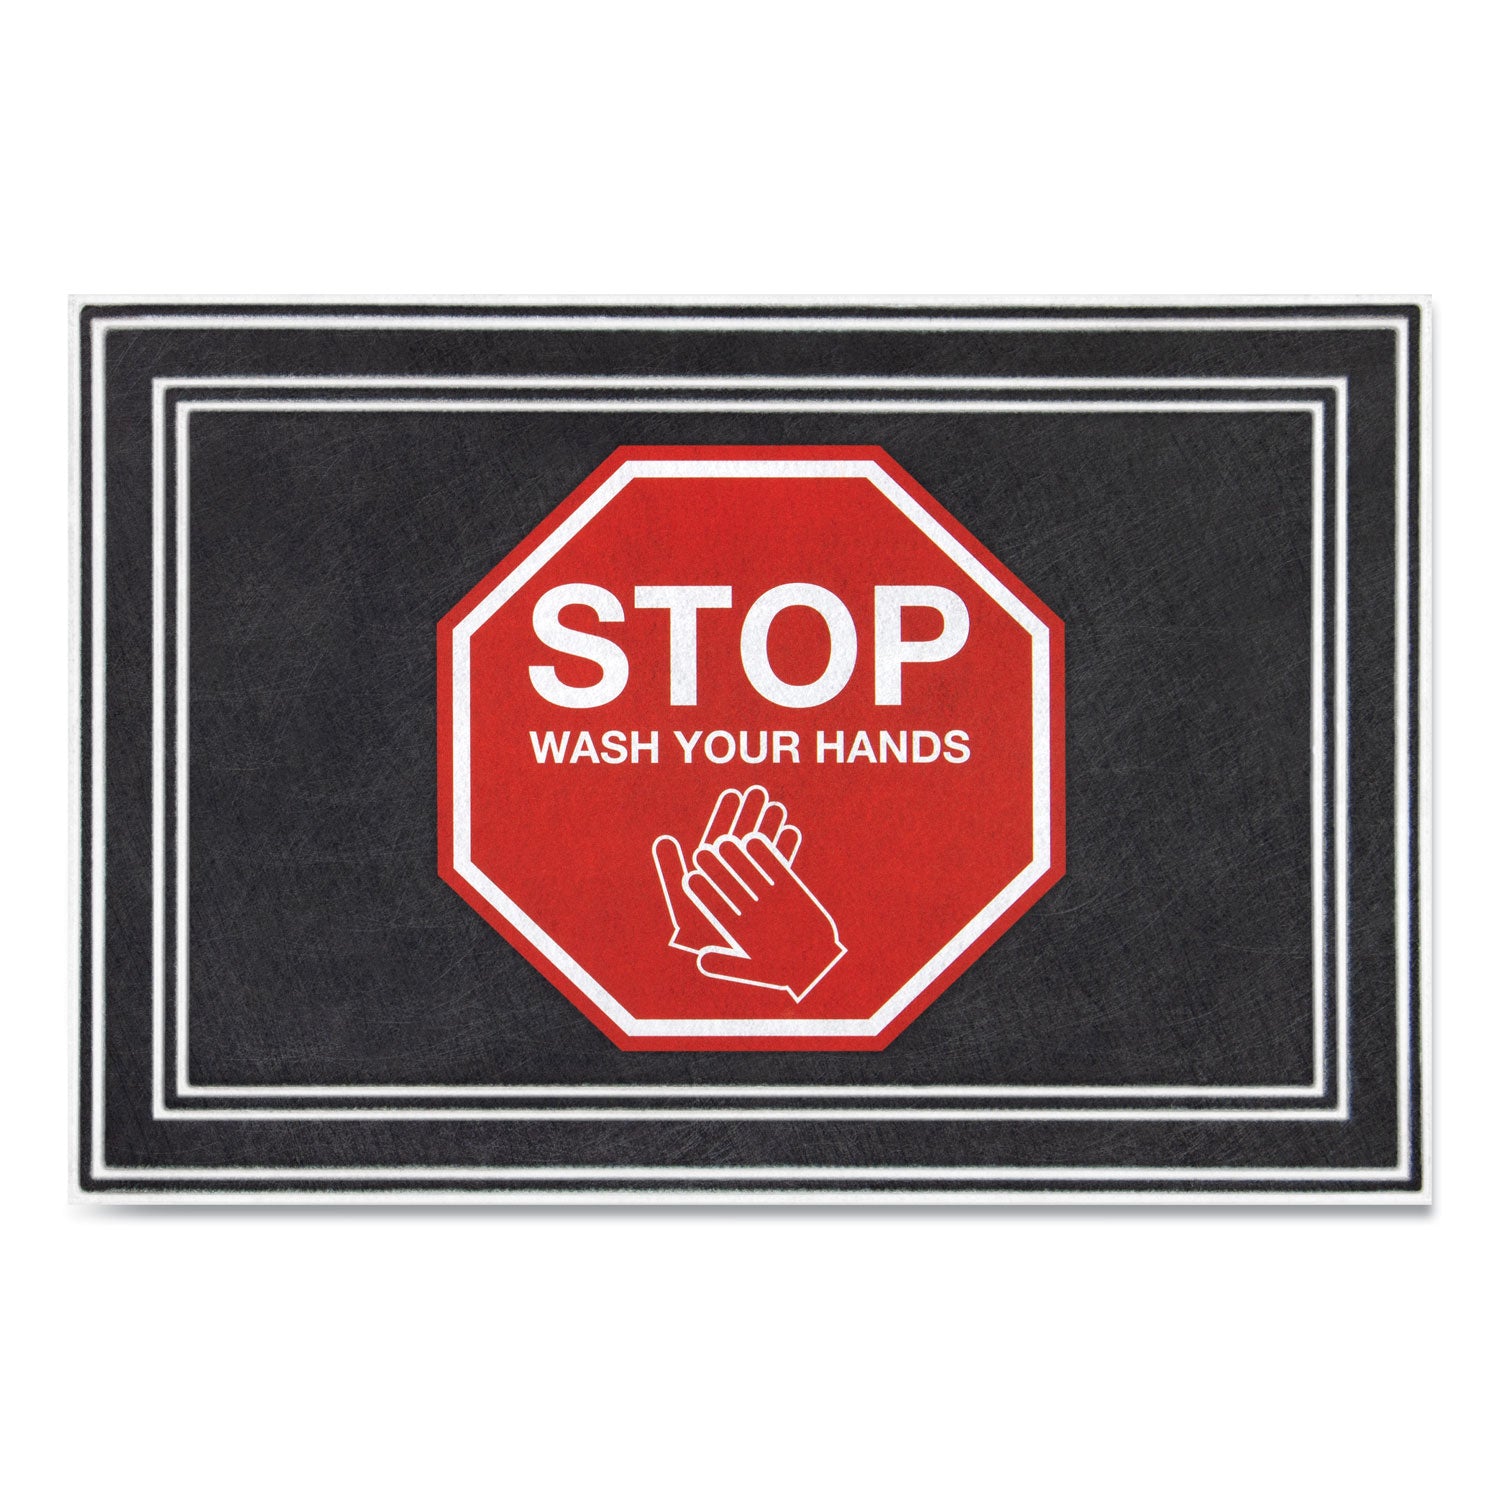 message-floor-mats-24-x-36-charcoal-red-stop-wash-your-hands_aph3984528832x3 - 1